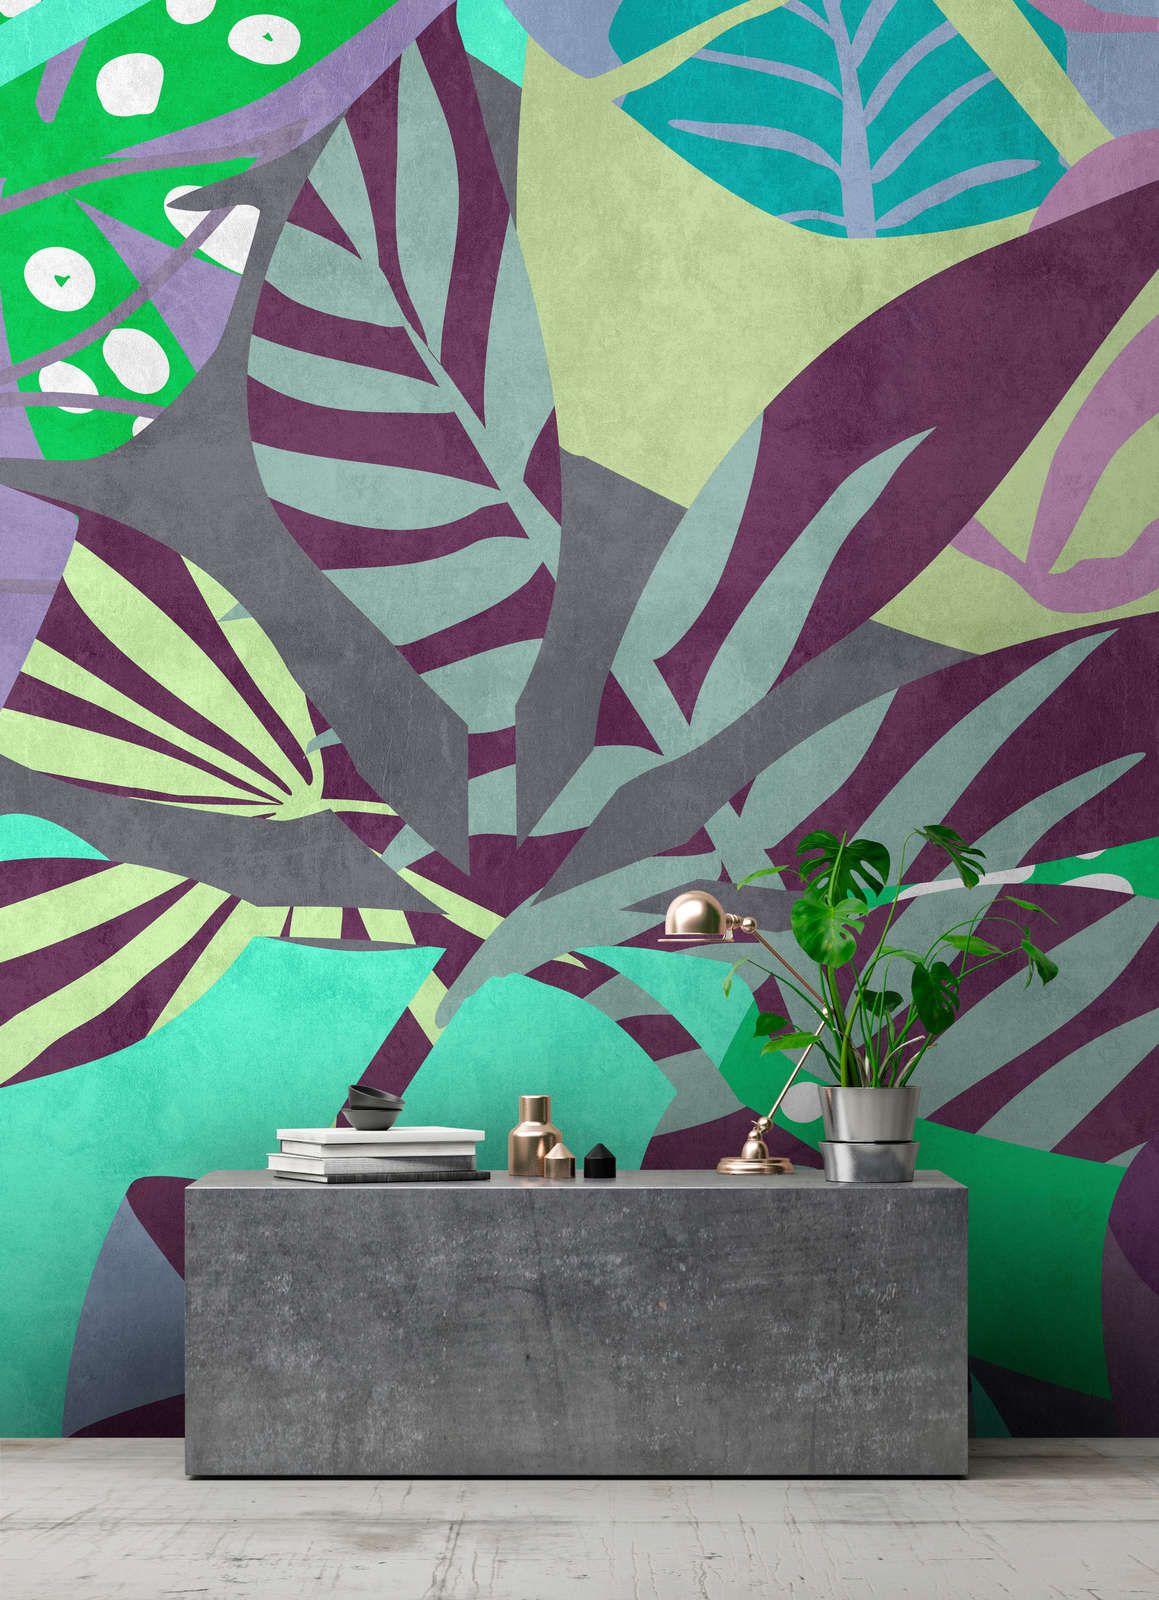             Photo wallpaper »anais 2« - Abstract leaves on concrete plaster texture - Purple, Green | Smooth, slightly pearlescent non-woven fabric
        